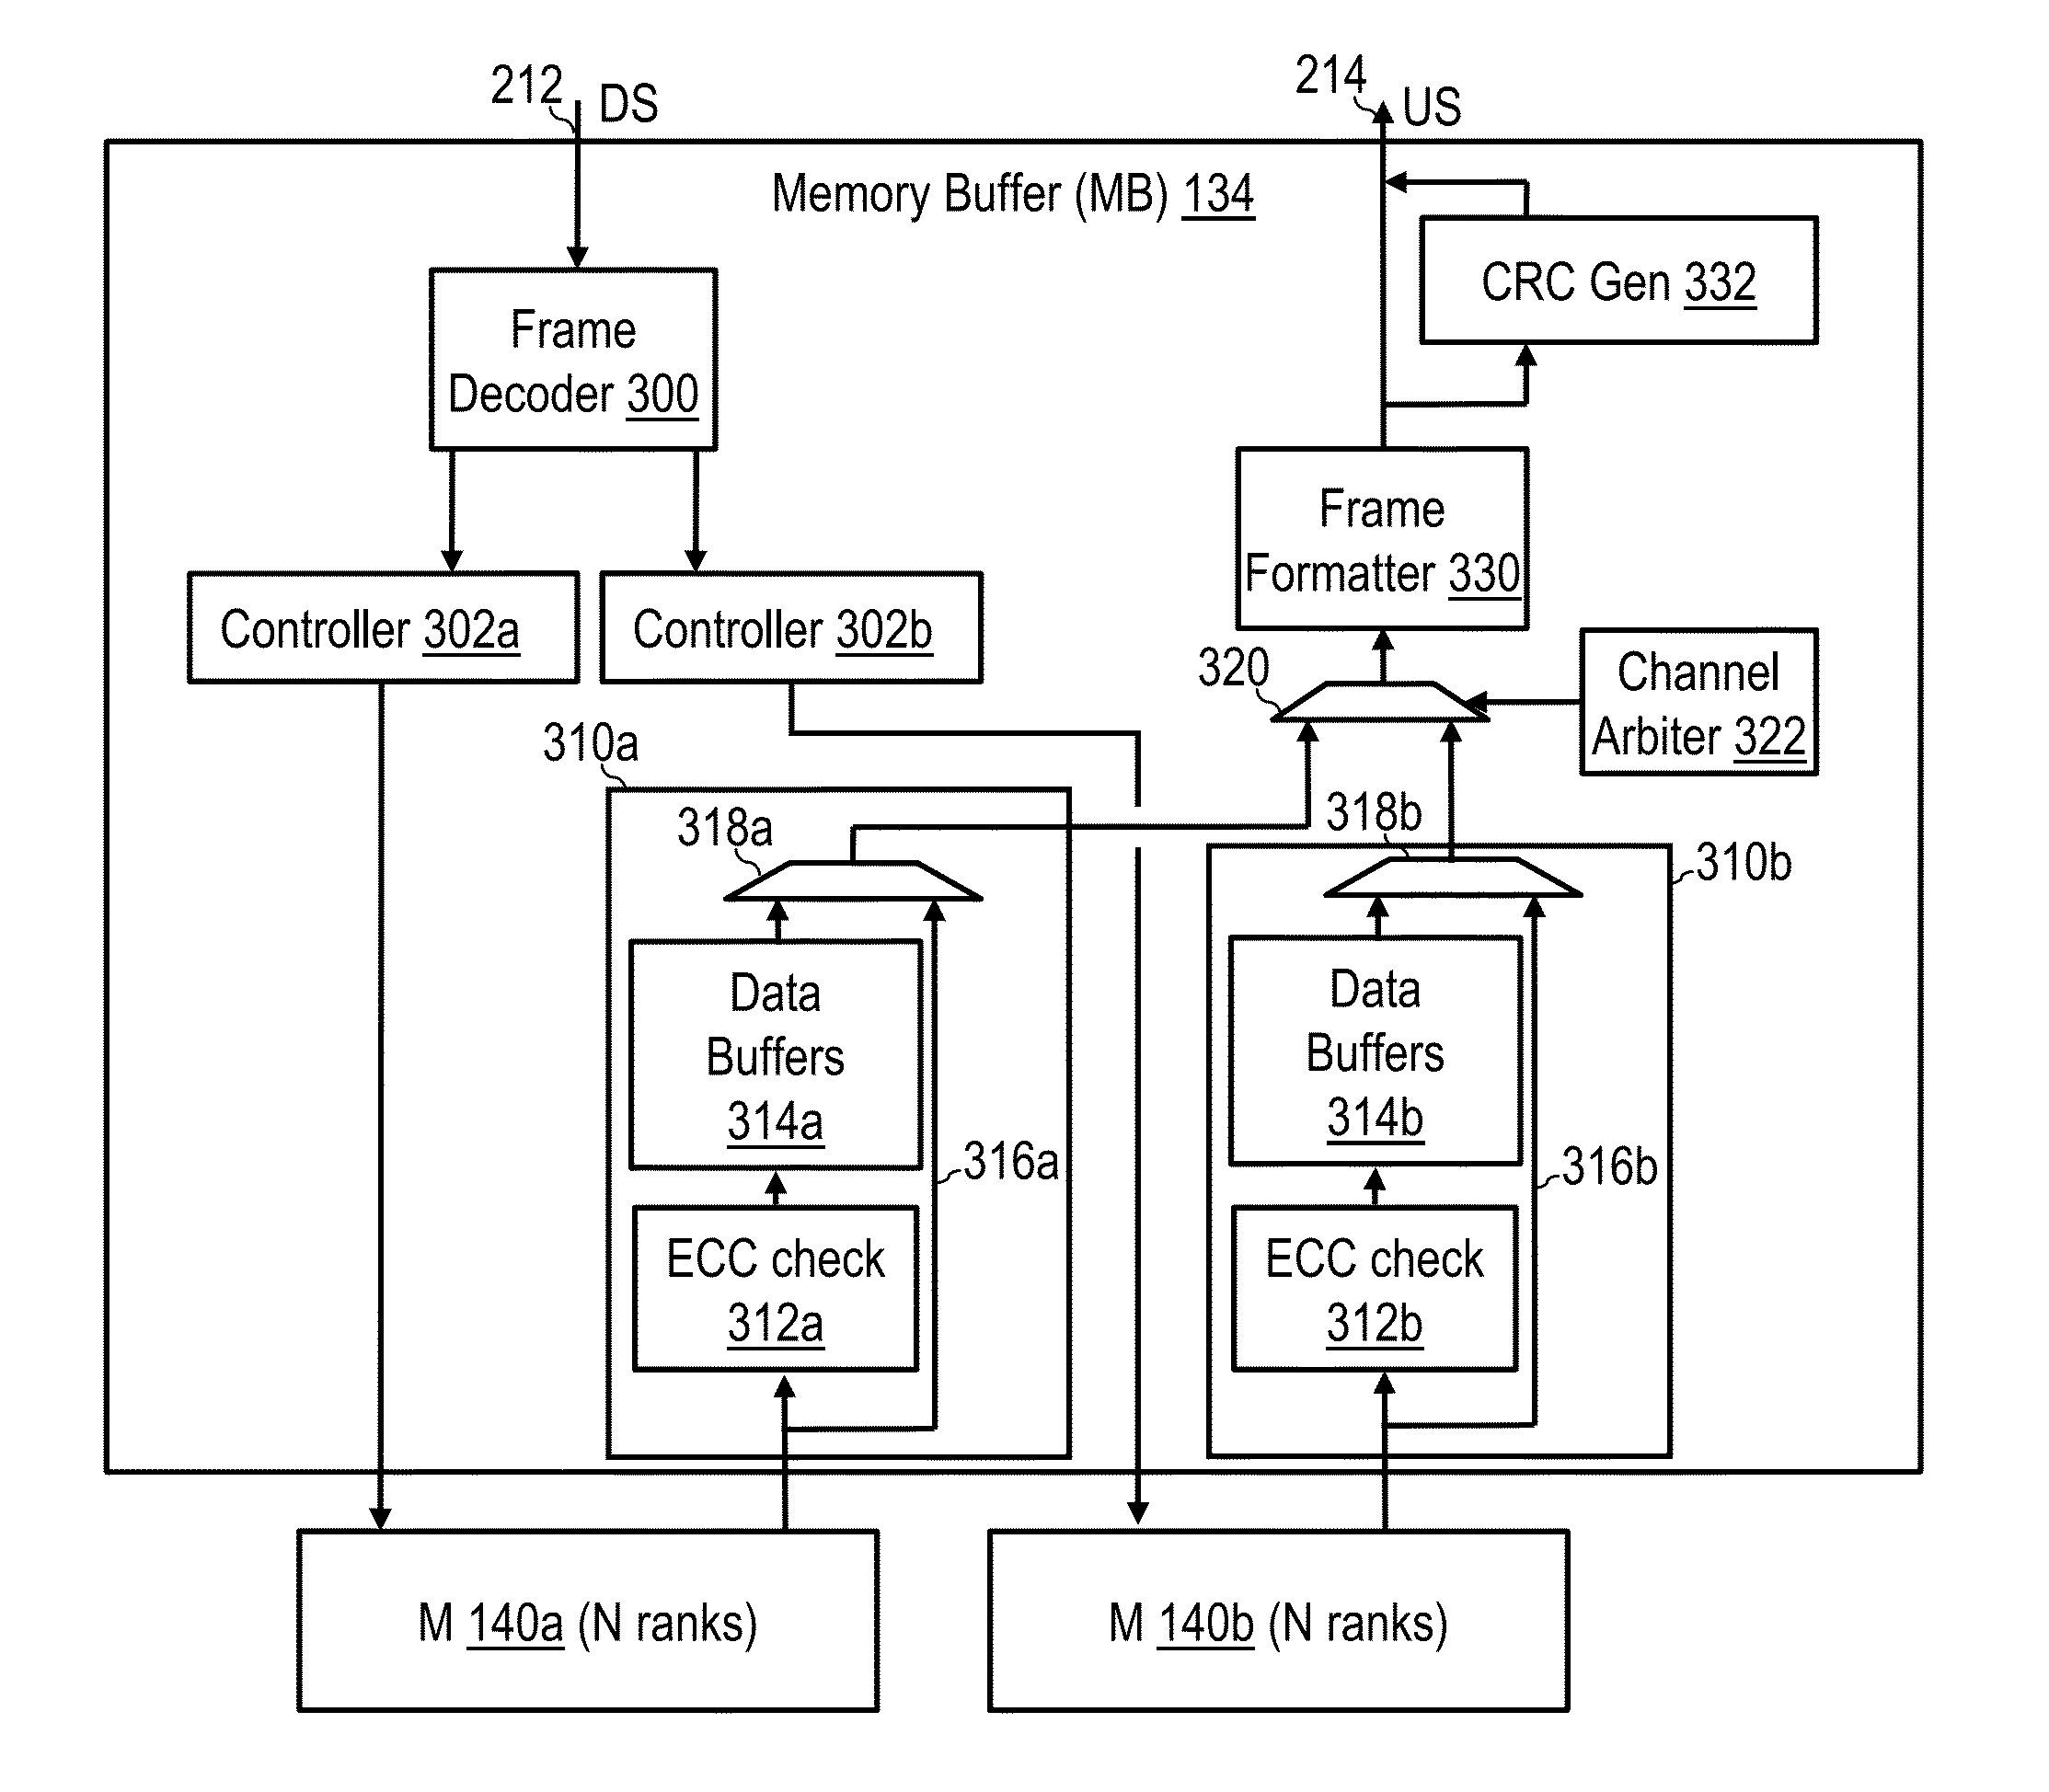 Speculative finish of instruction execution in a processor core